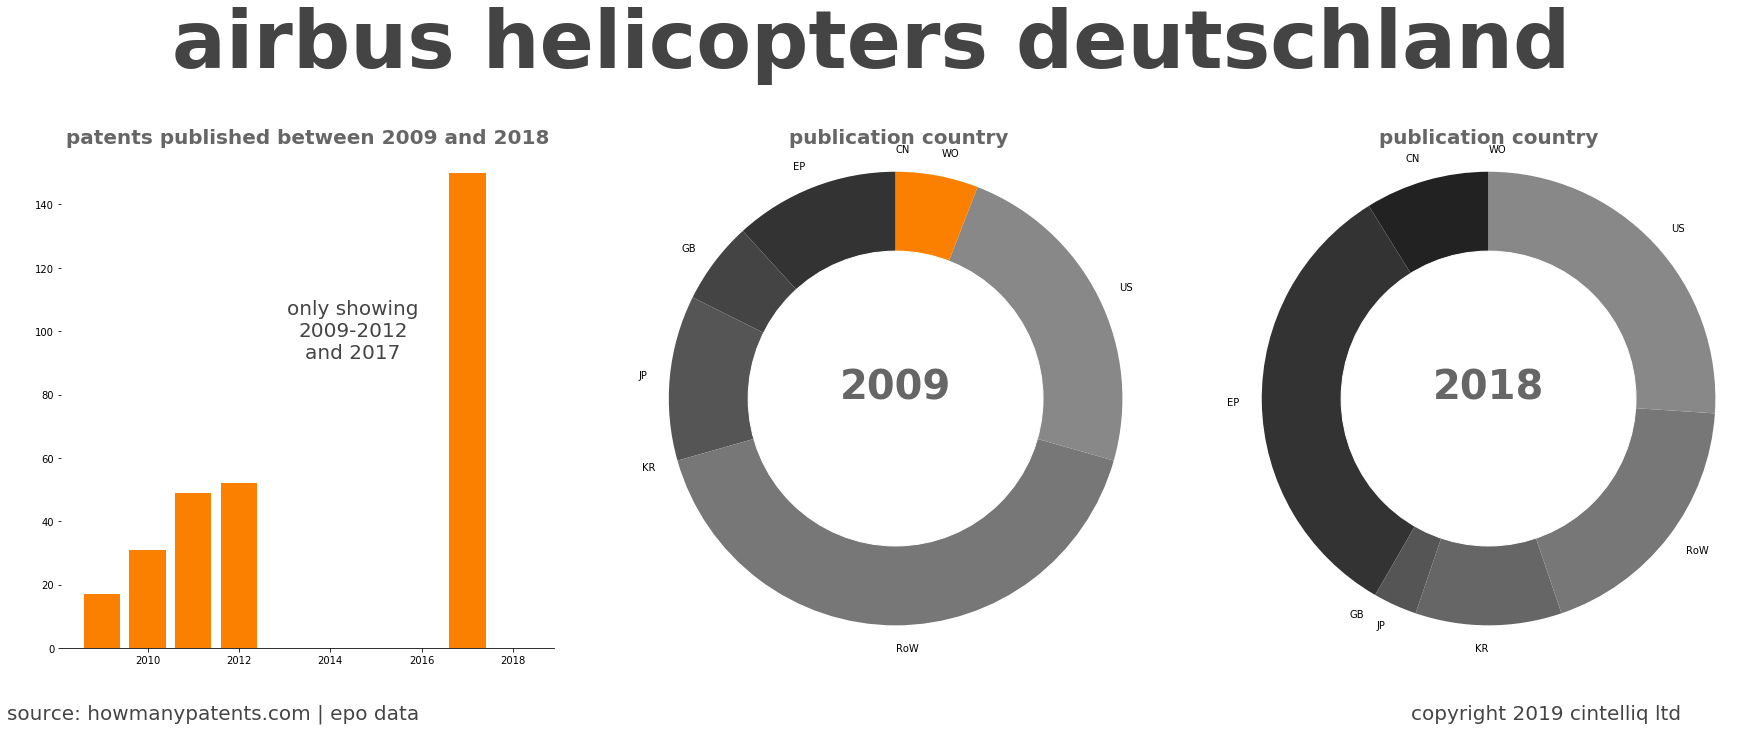 summary of patents for Airbus Helicopters Deutschland